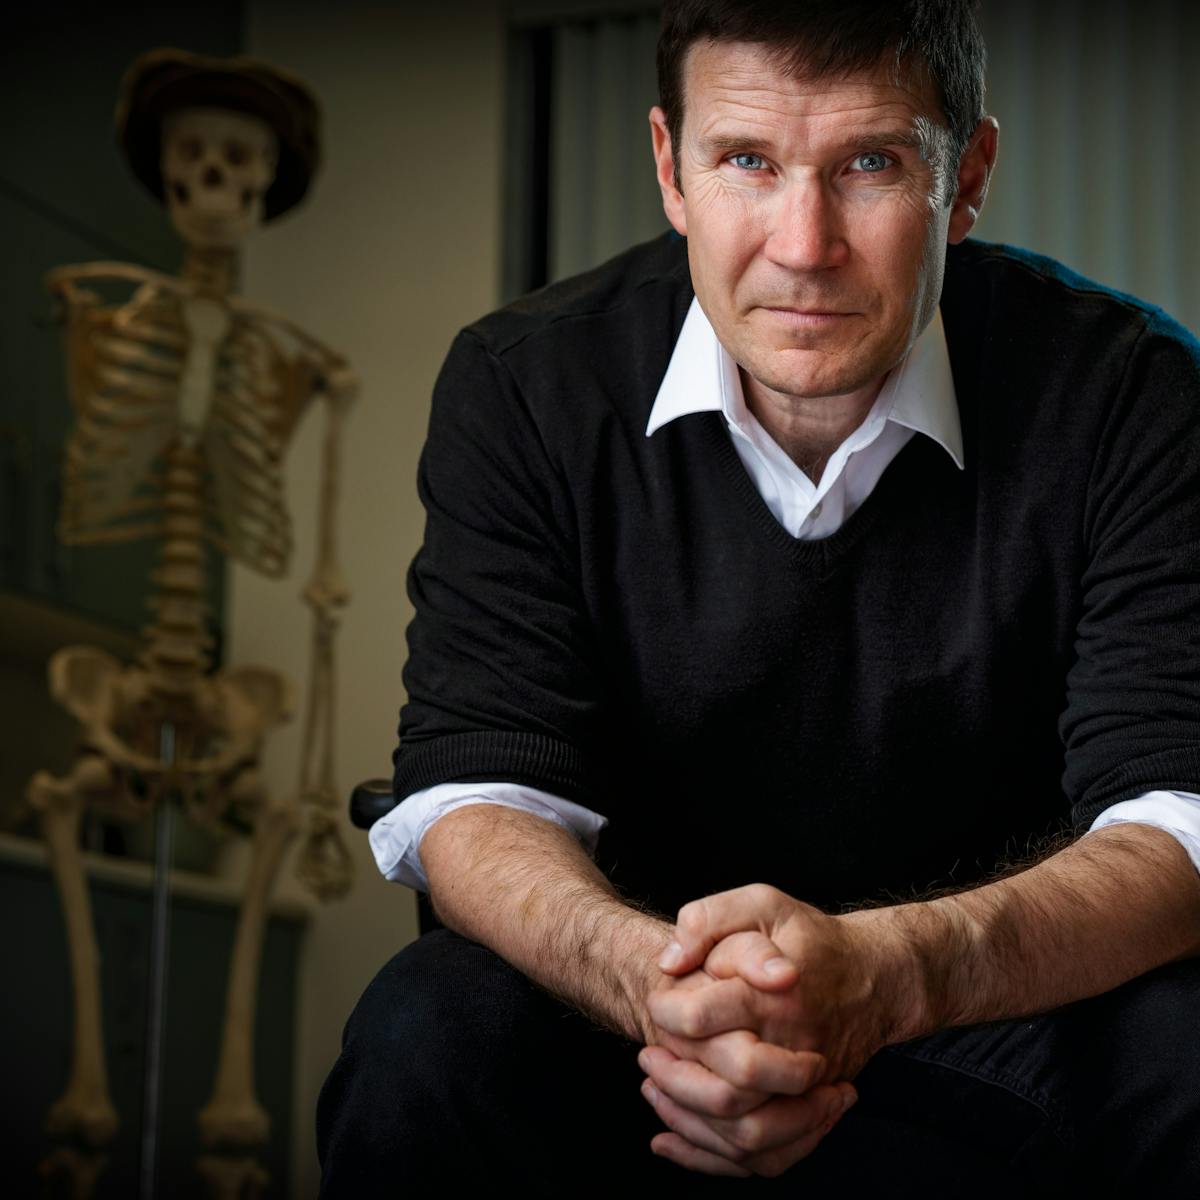 Photograph of a male doctor in his consultation room, leaning forward on his desk chair looking intently into the camera. He is dramatically lit from the side and in the background a skeleton wearing a hat can just be made out.